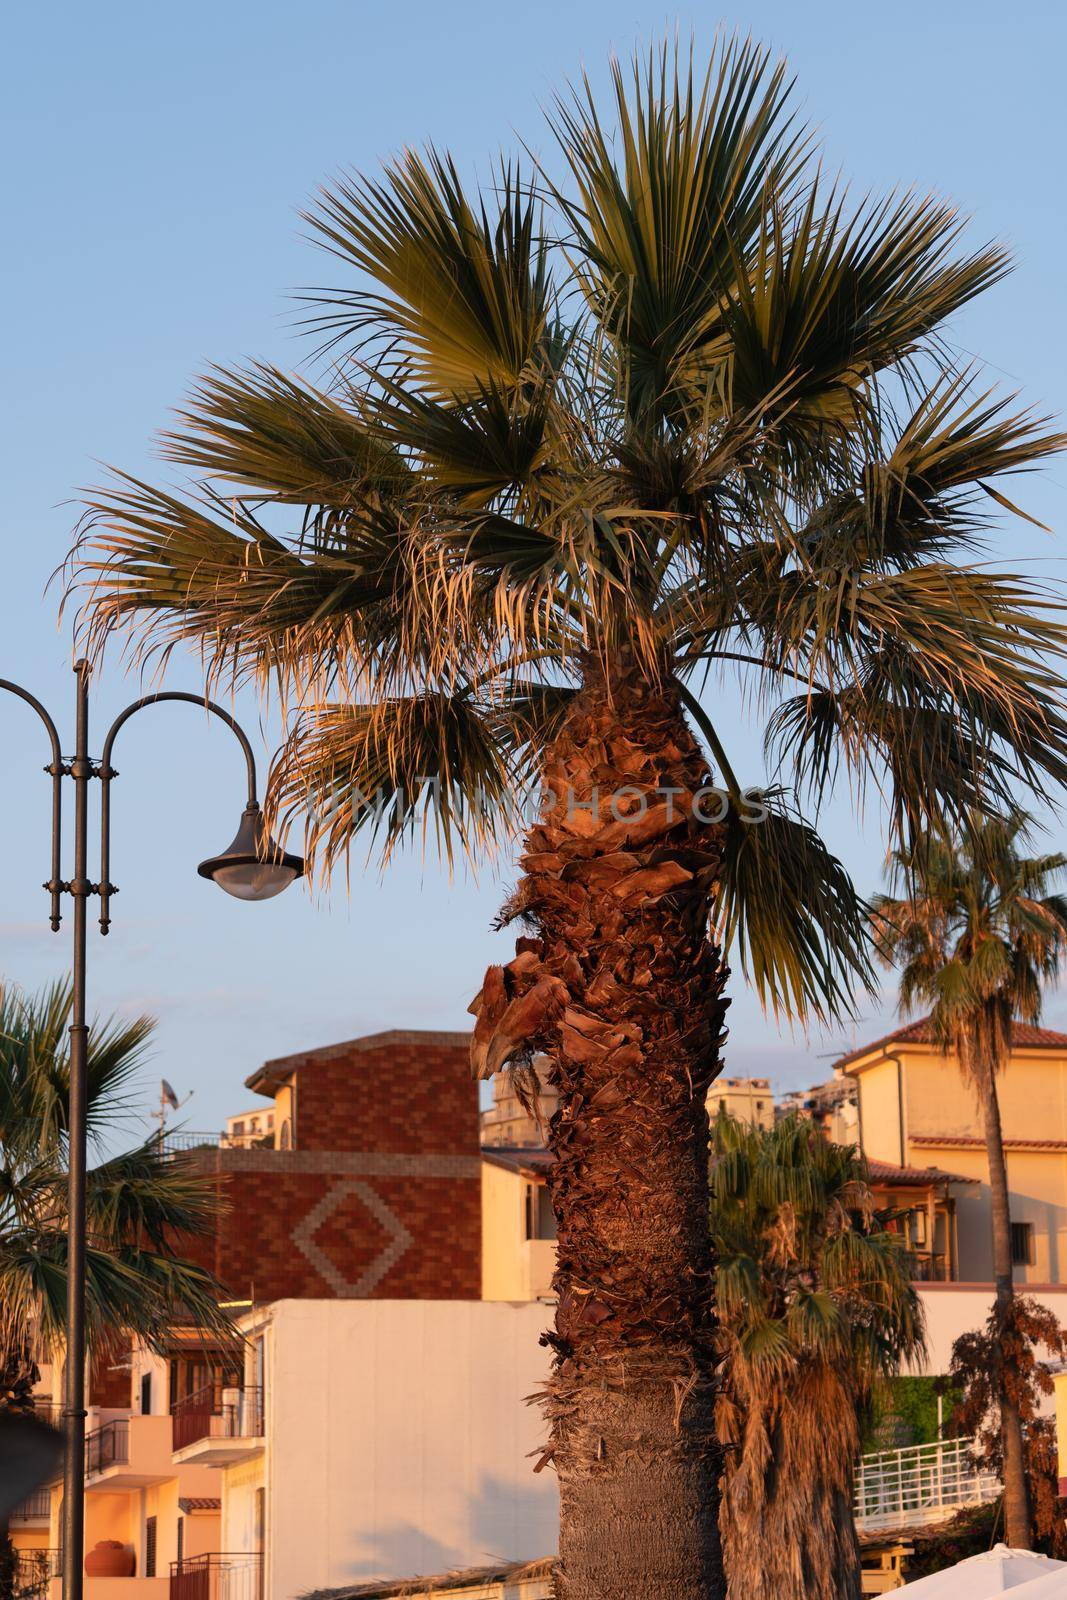 Palm trees against blue sky on sunny summer day, Calabria seaside, Southern Italy